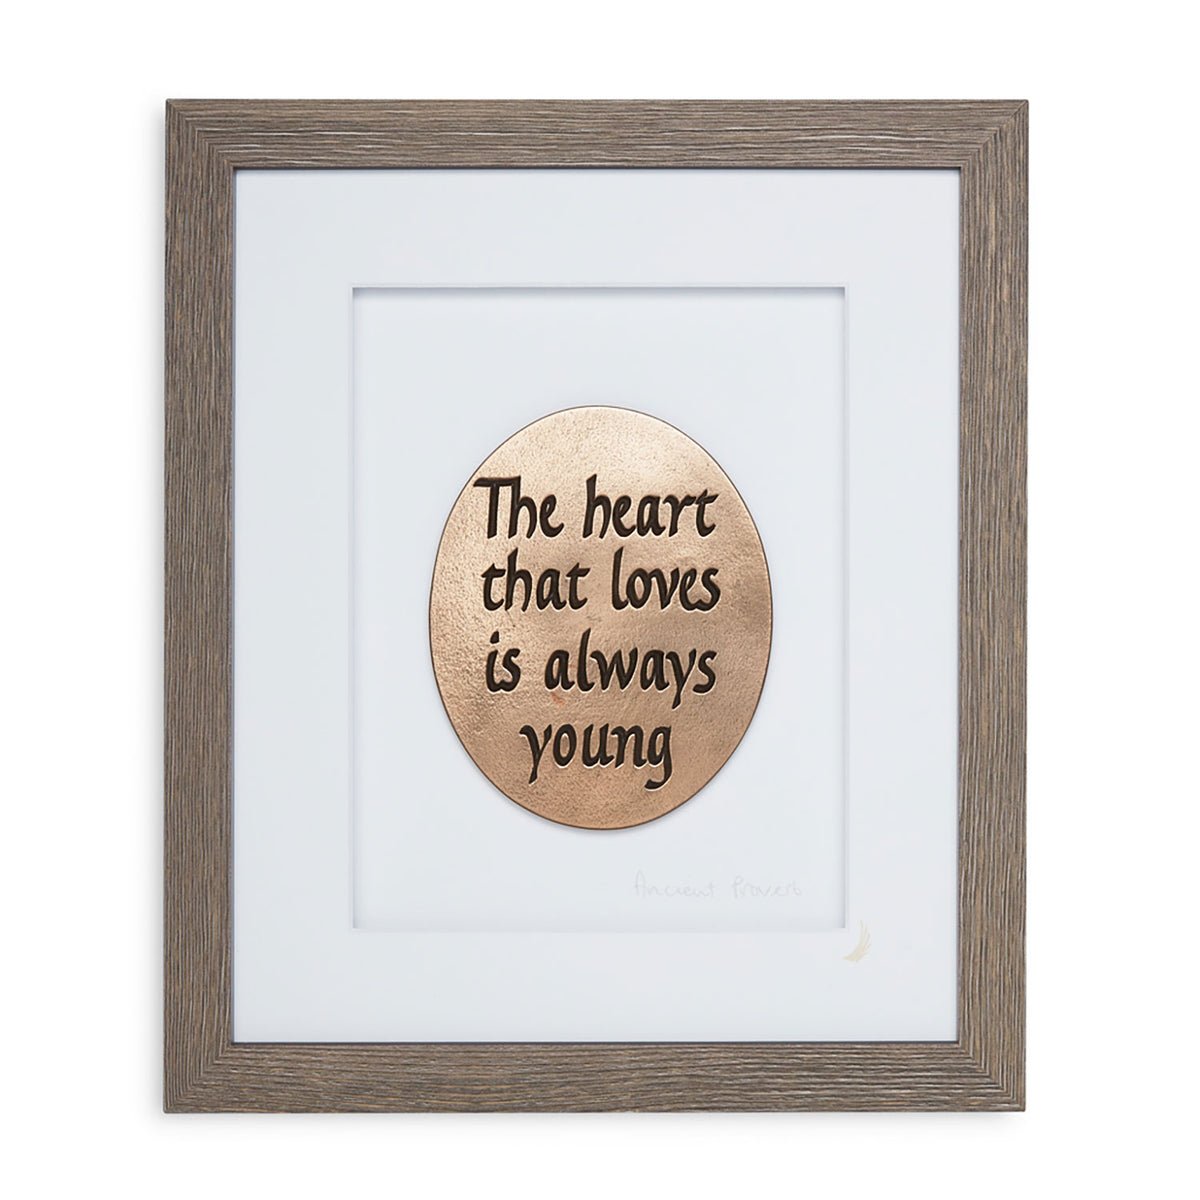 The Heart That Loves is Always Young - Grey